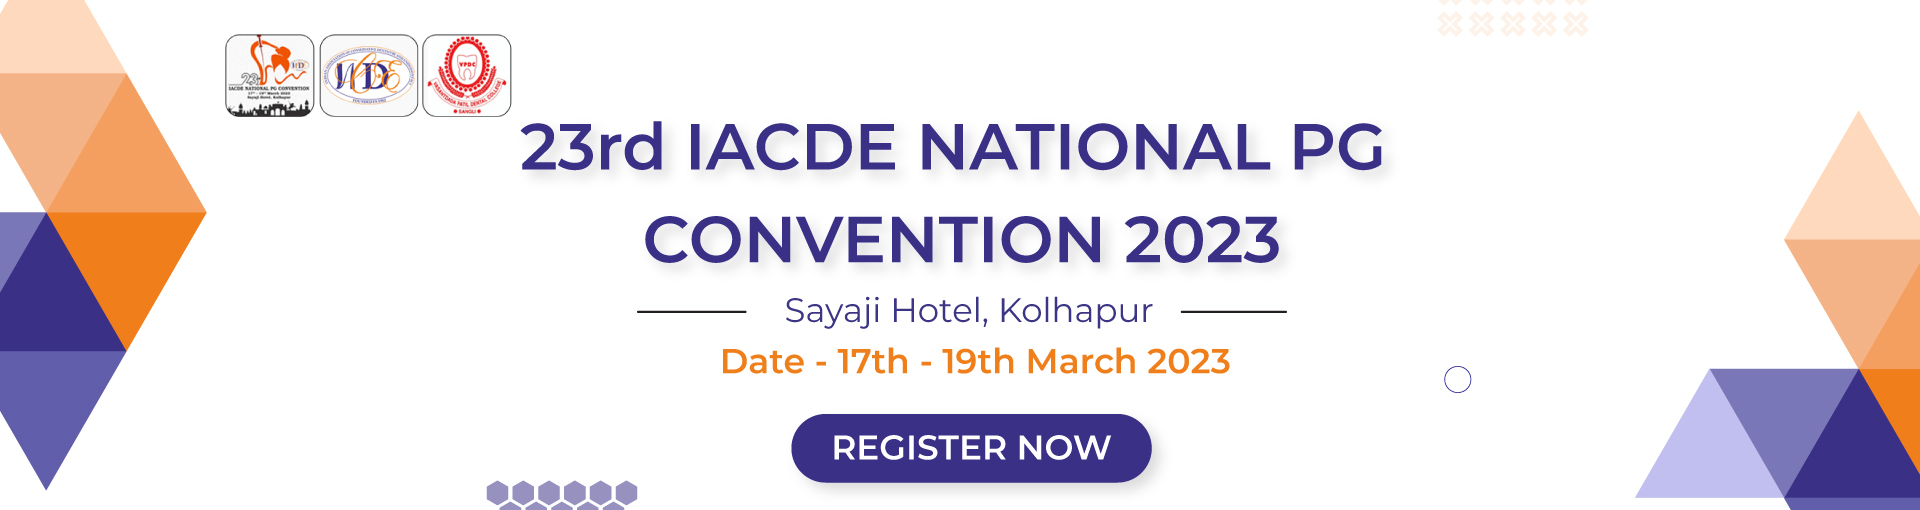 23rd IACDE National PG Convention 2023